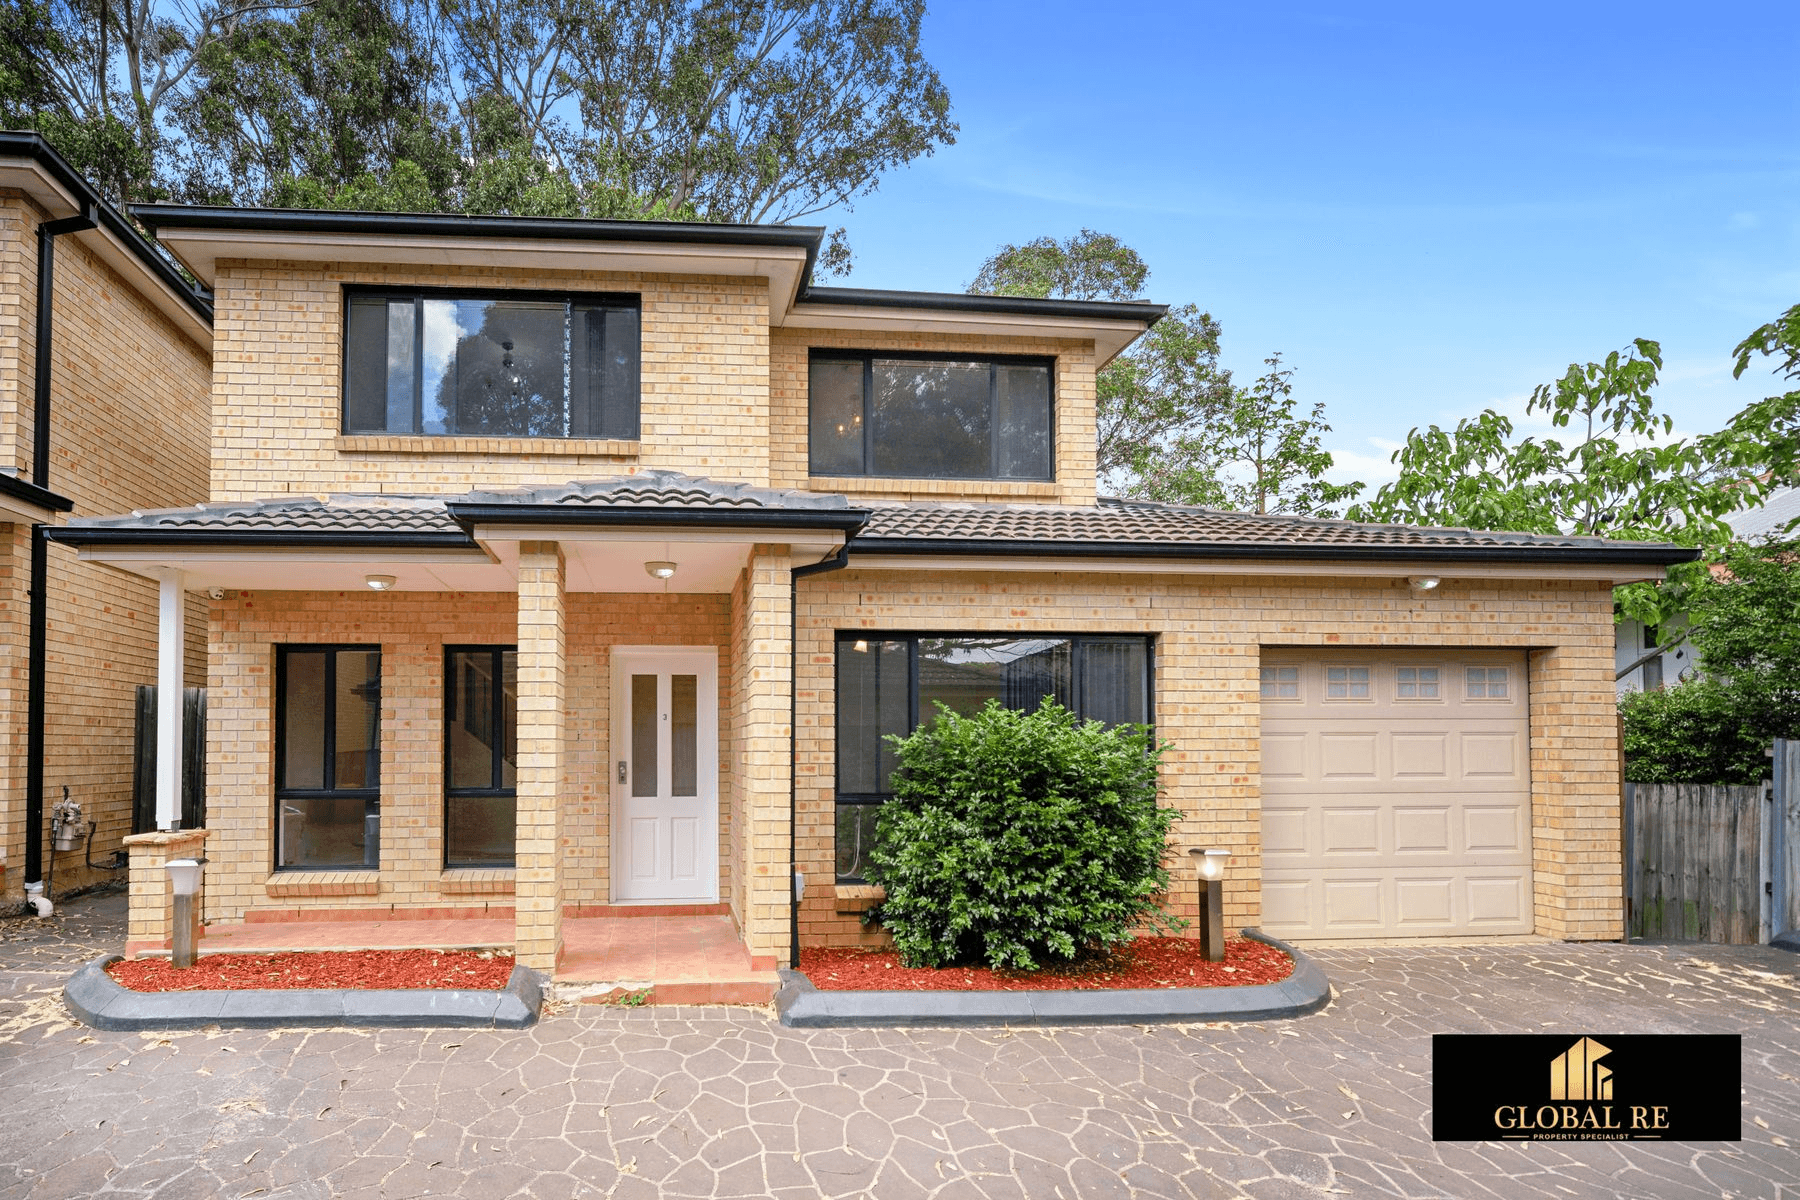 3/15 Hishion Place, GEORGES HALL, NSW 2198